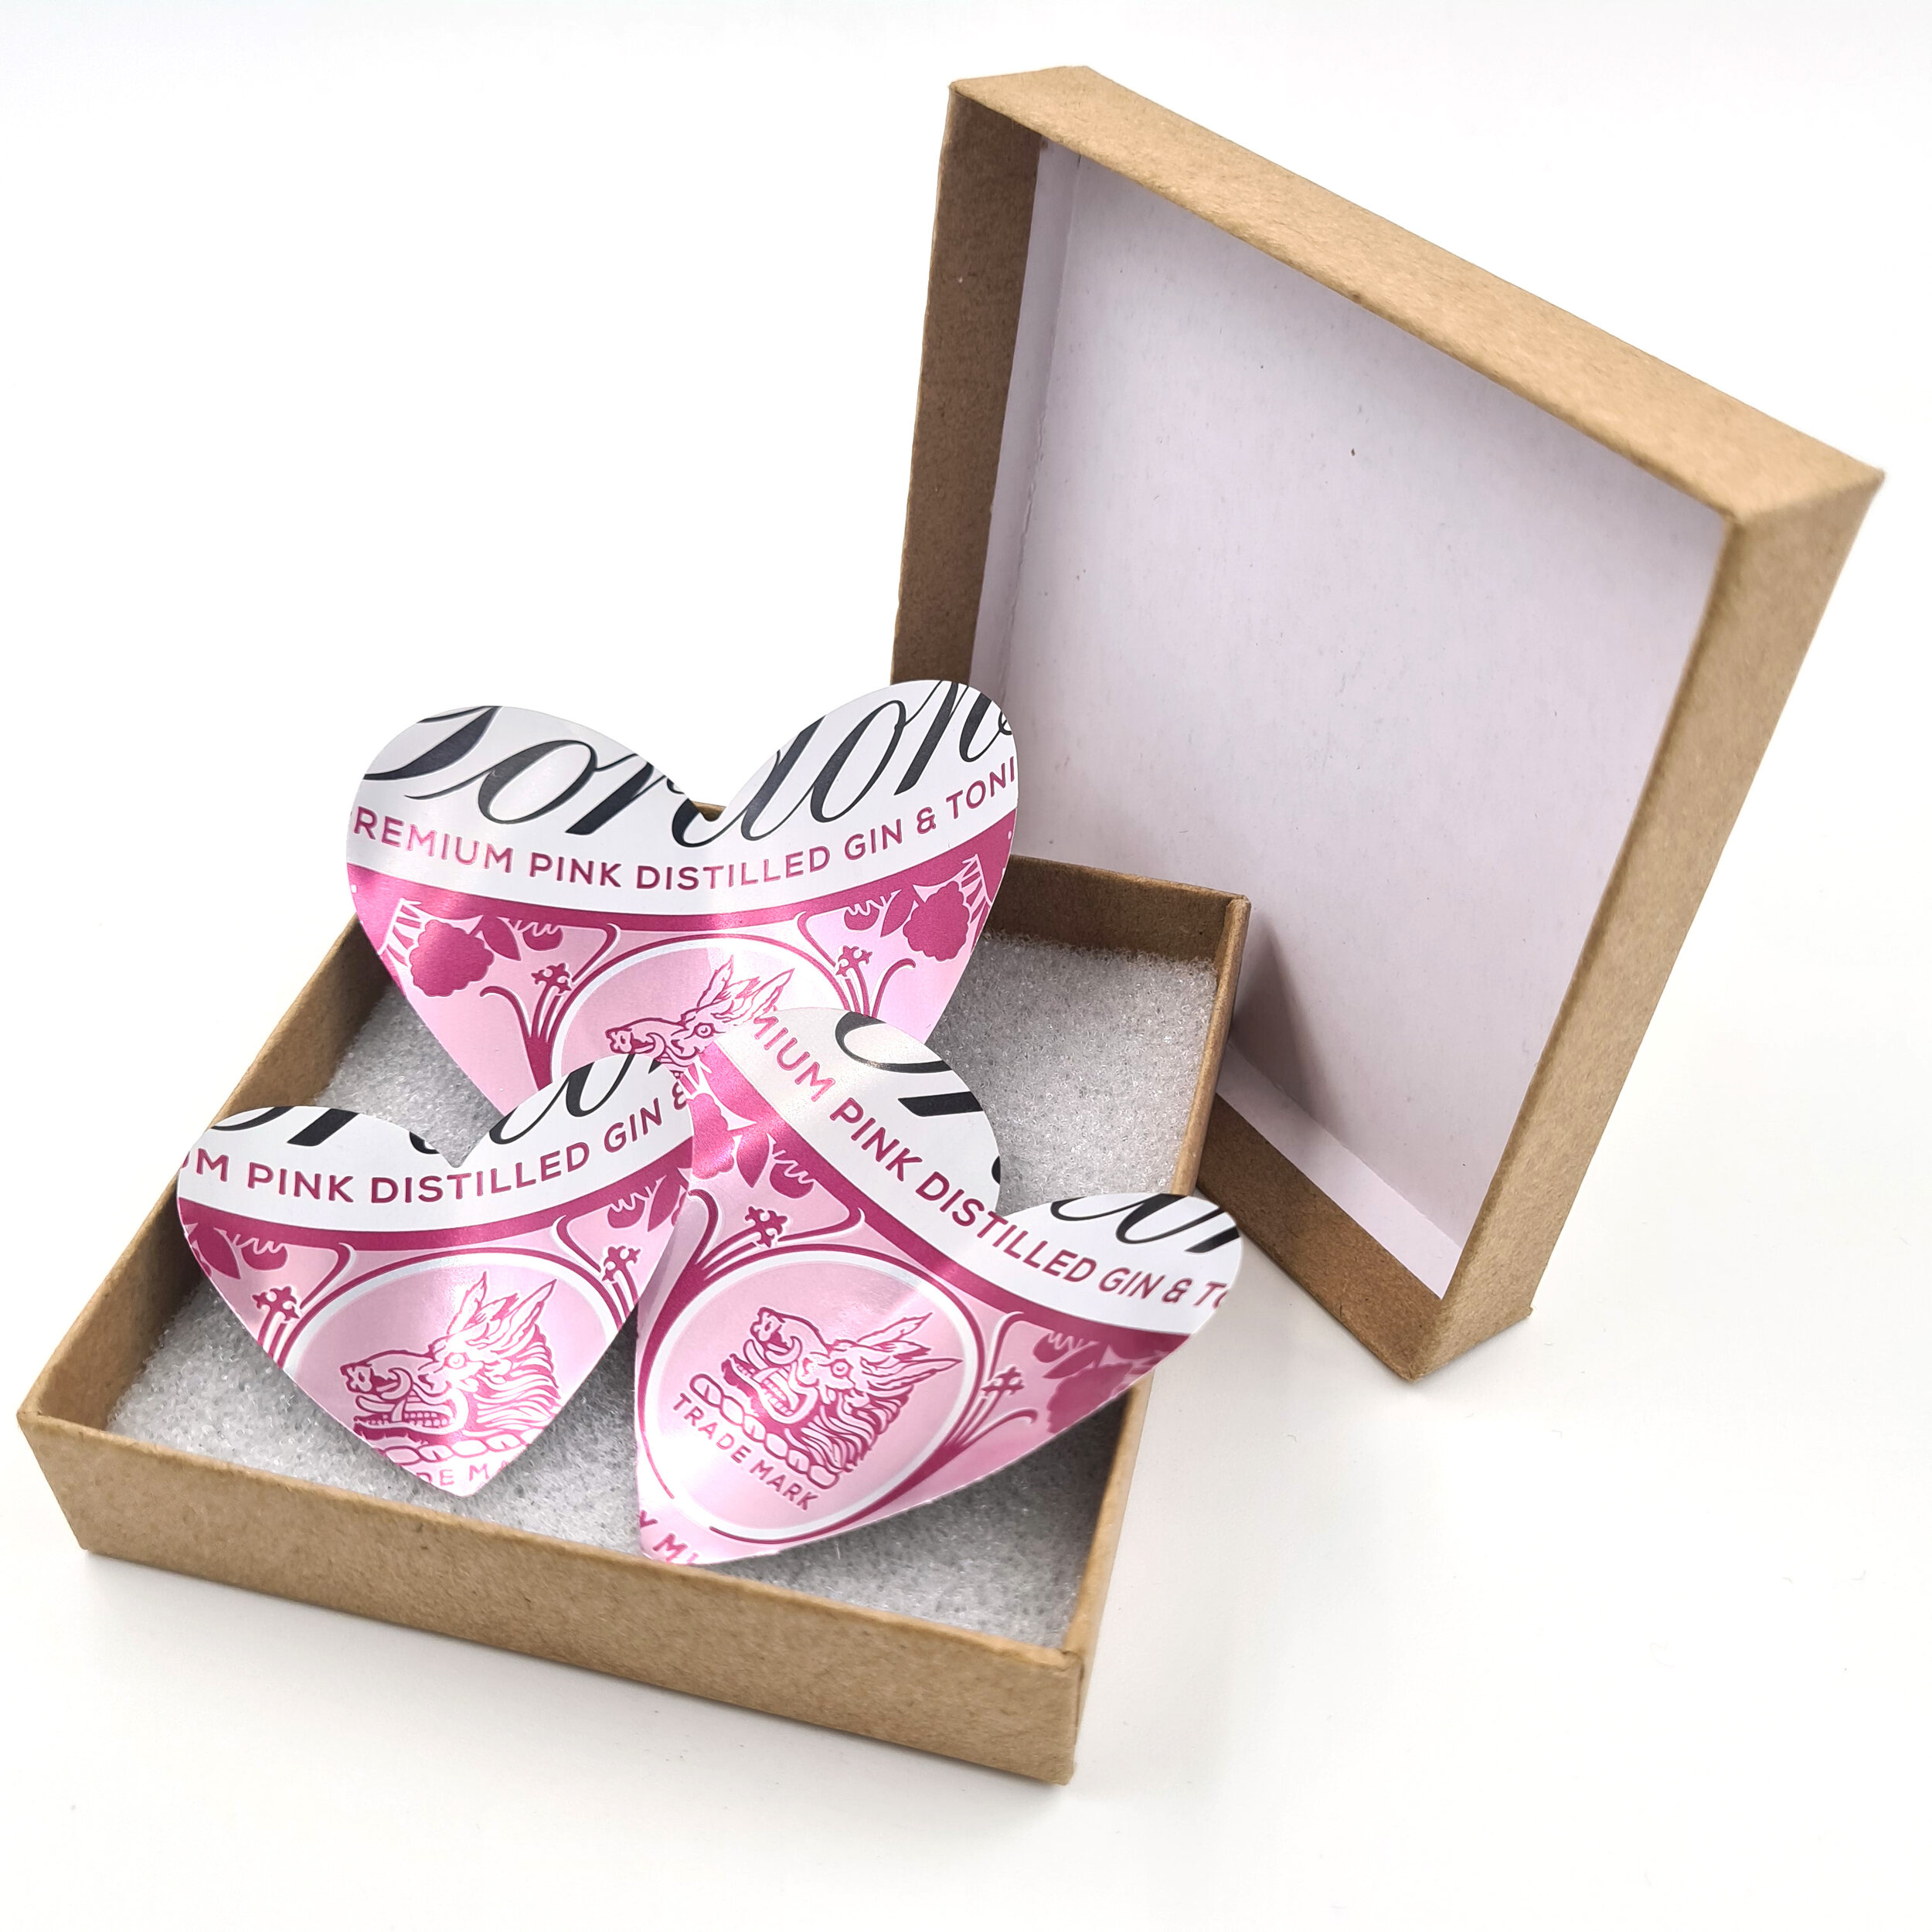 Three Pink and white Gin Heart Can Magnets in box